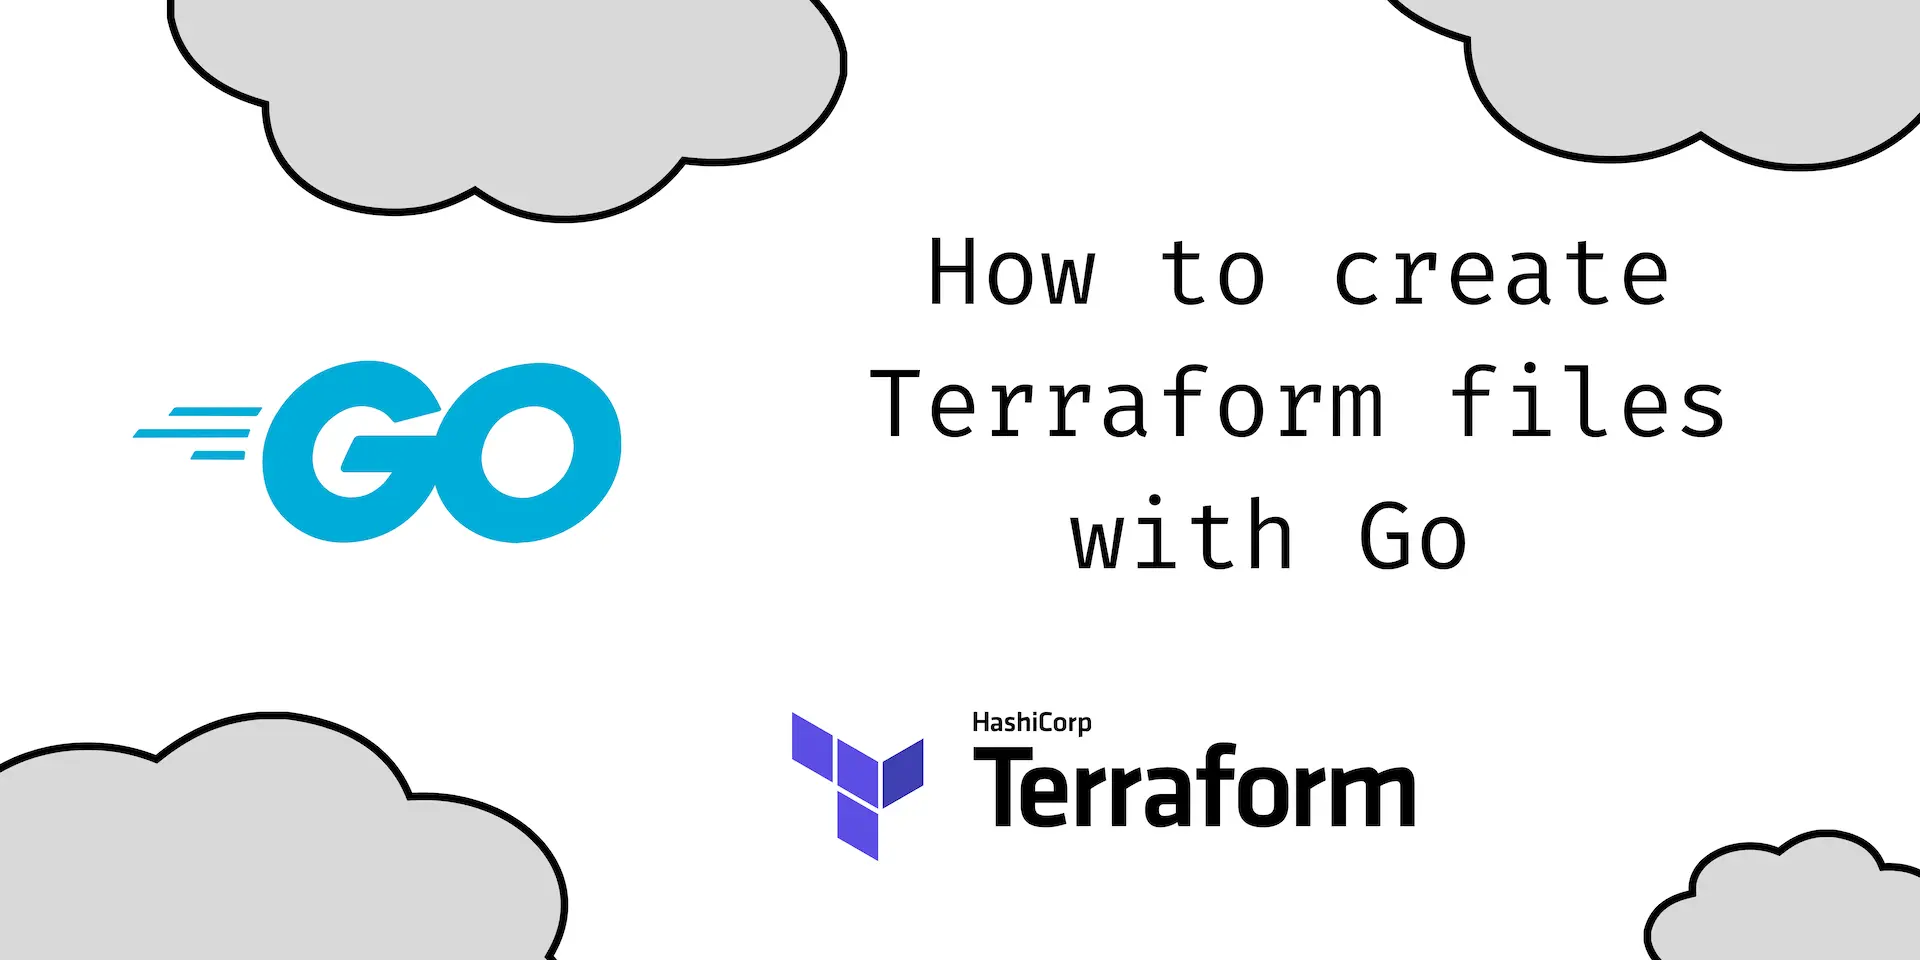 A programmatic and scalable approach to Terraform files creation